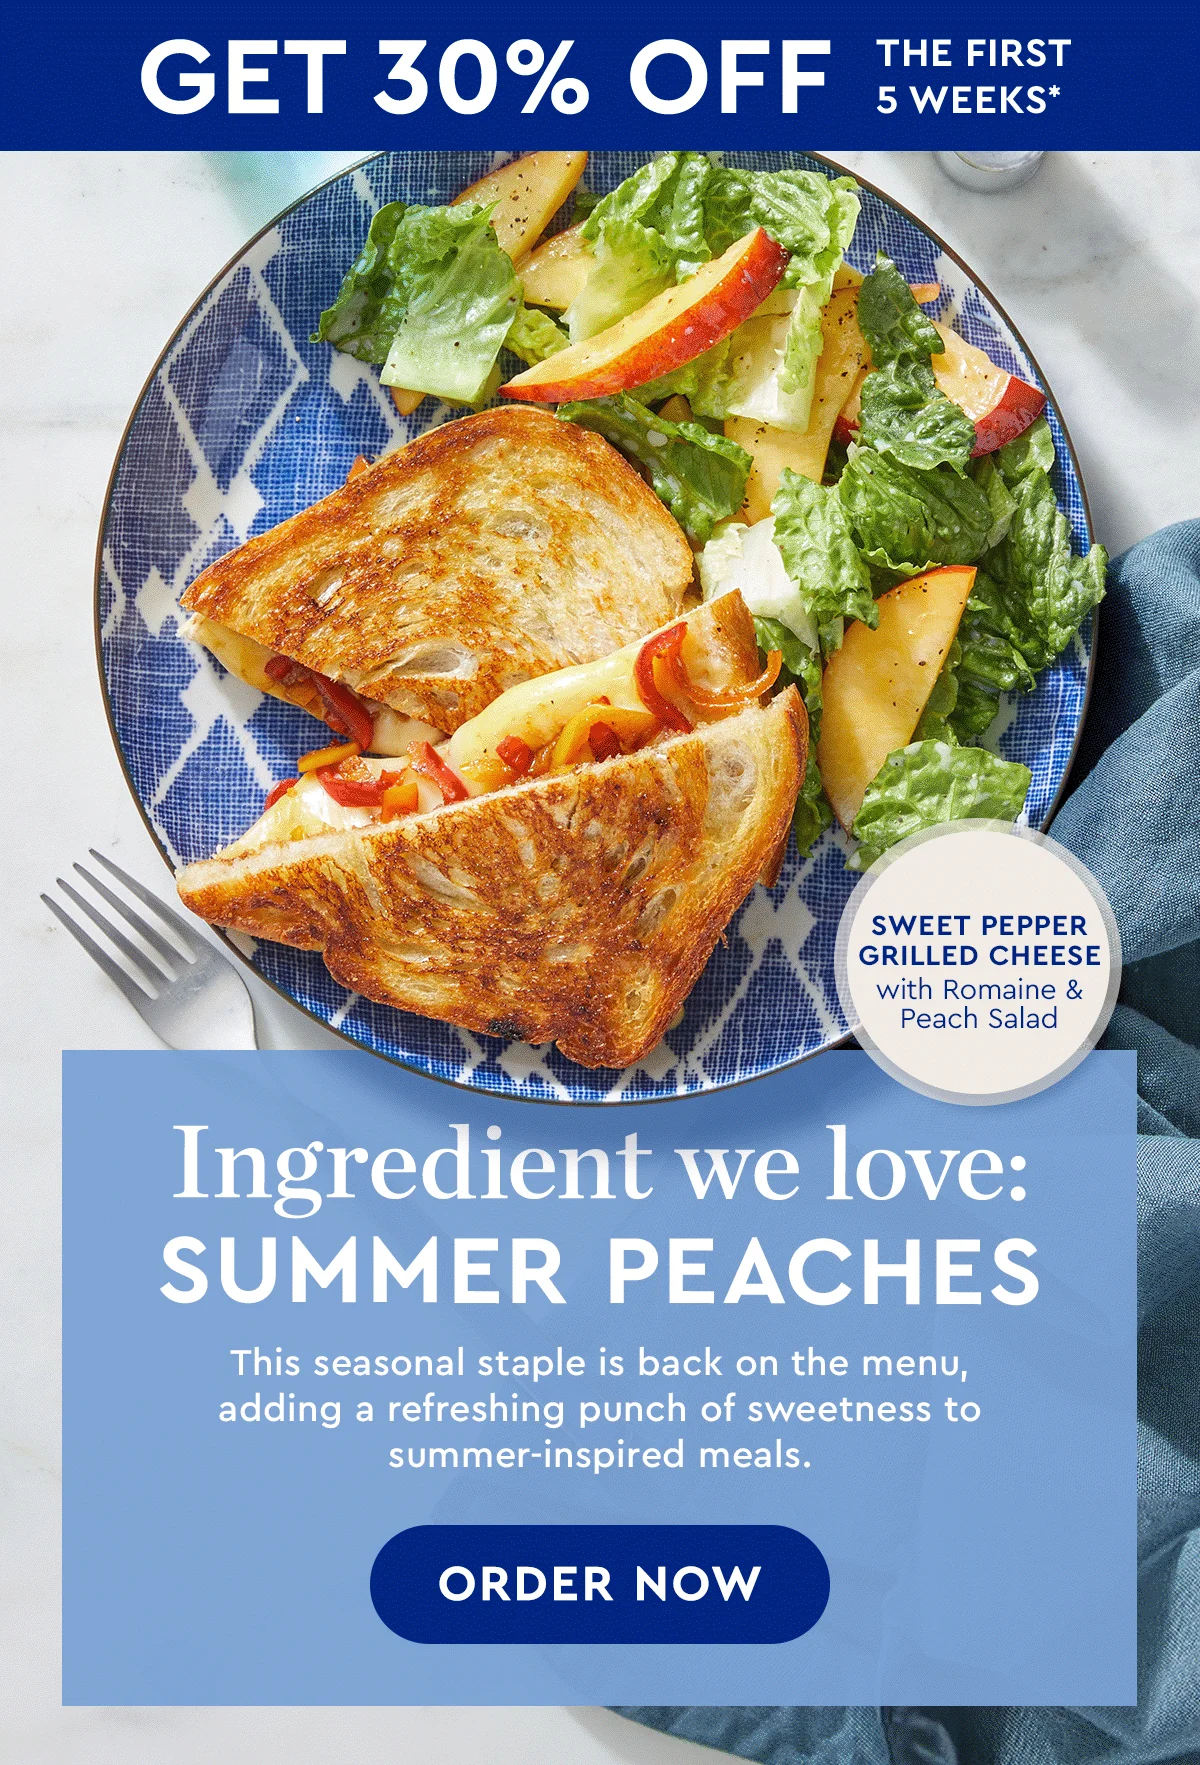 GET 30\\$ OFF THE FIRST 5 WEEKS* | Ingredient we love: Summer Peaches | This seasonal staple is back on the menu, adding a refreshing punch of sweetness to summer-inspired recipes. | ORDER NOW